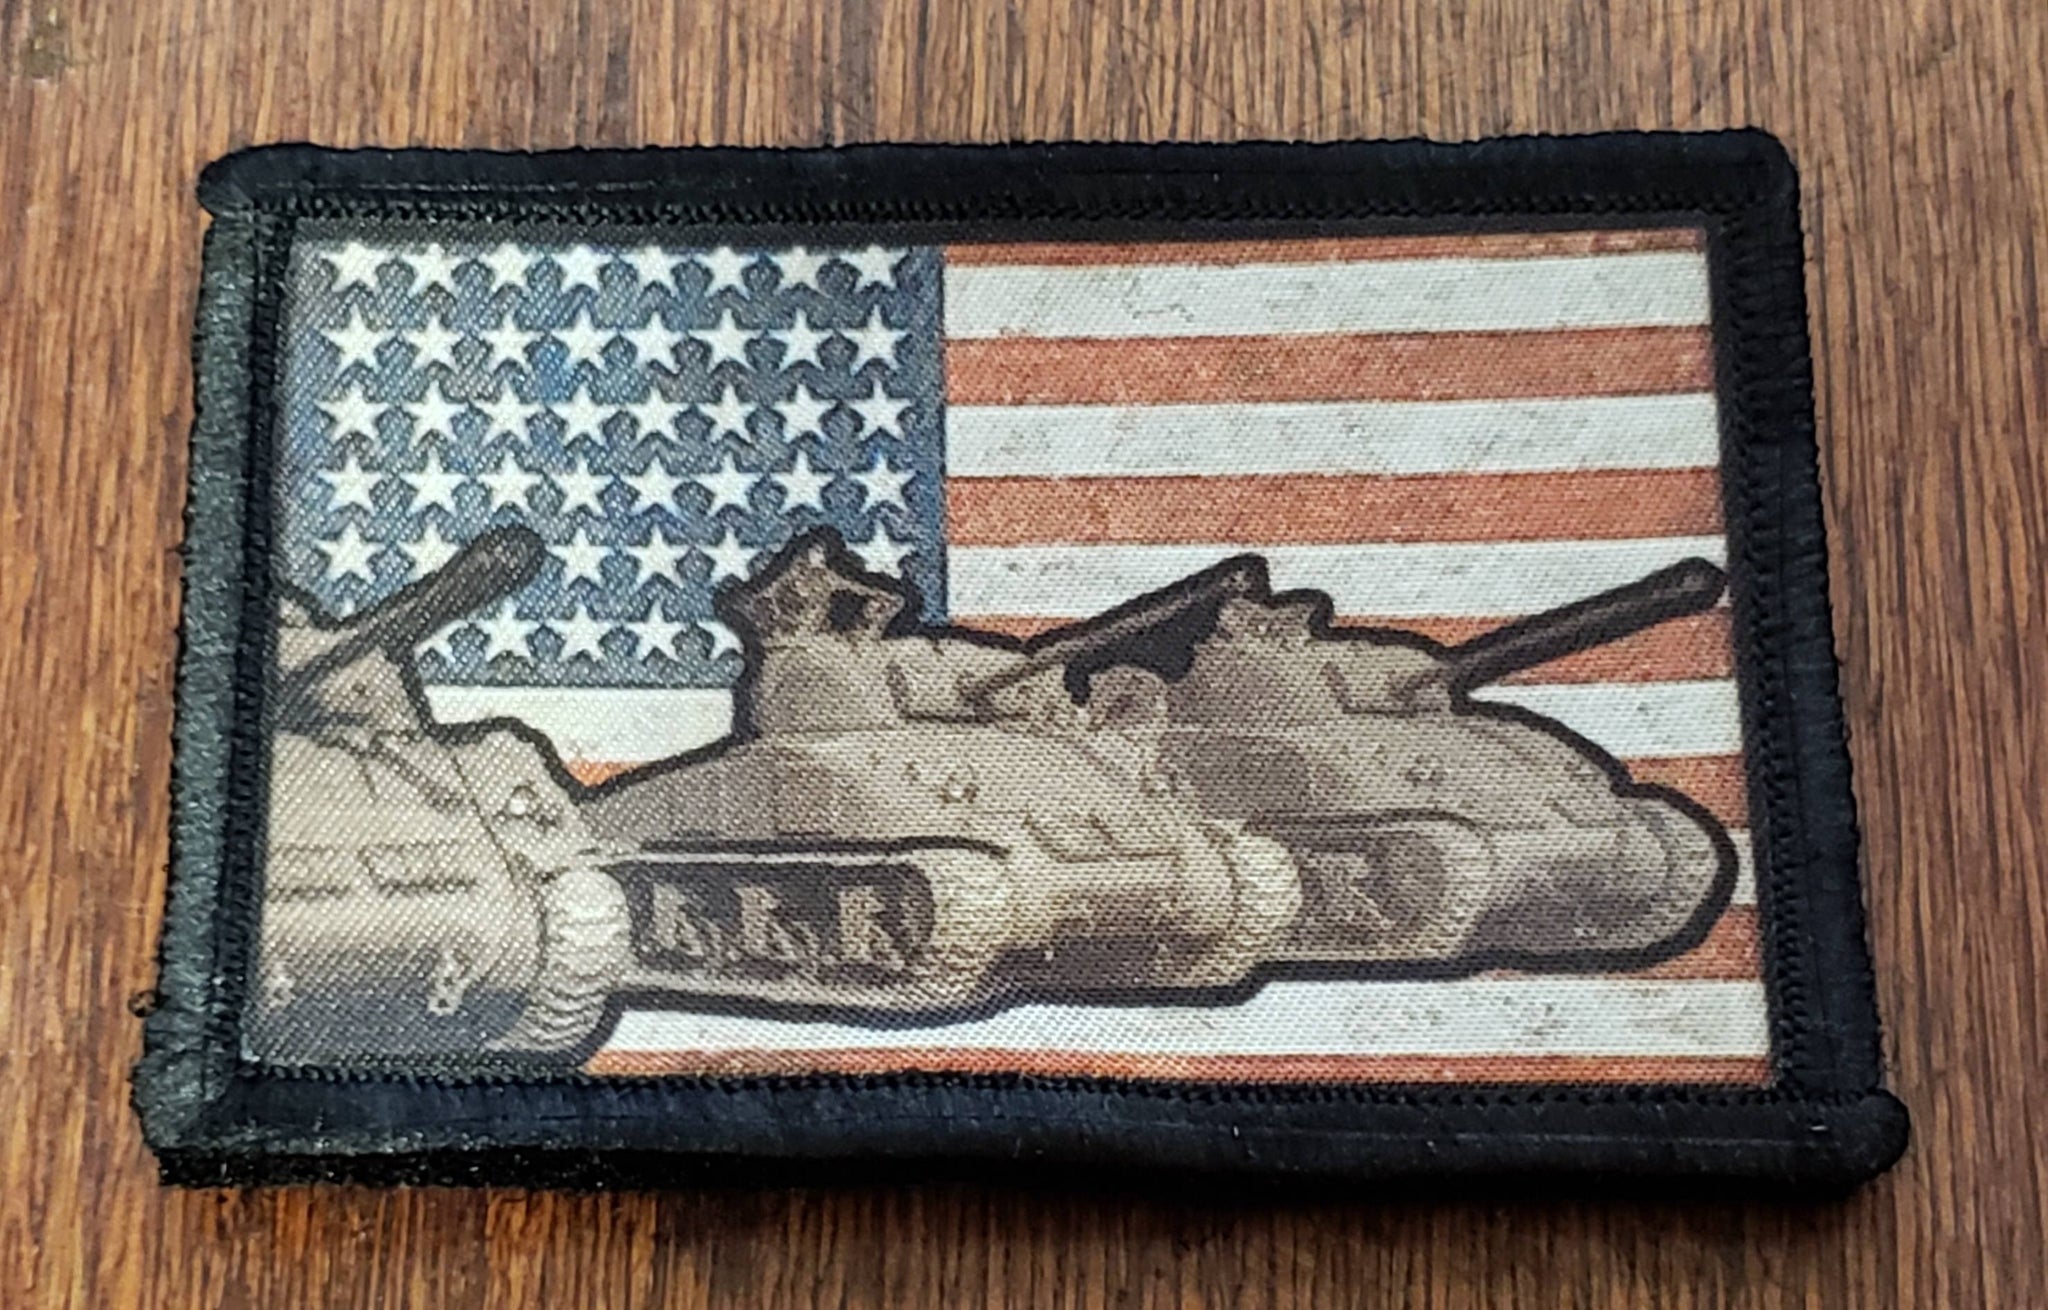 USA Flag Sherman Tanks on Parade Morale Patch Morale Patches Redheaded T Shirts 